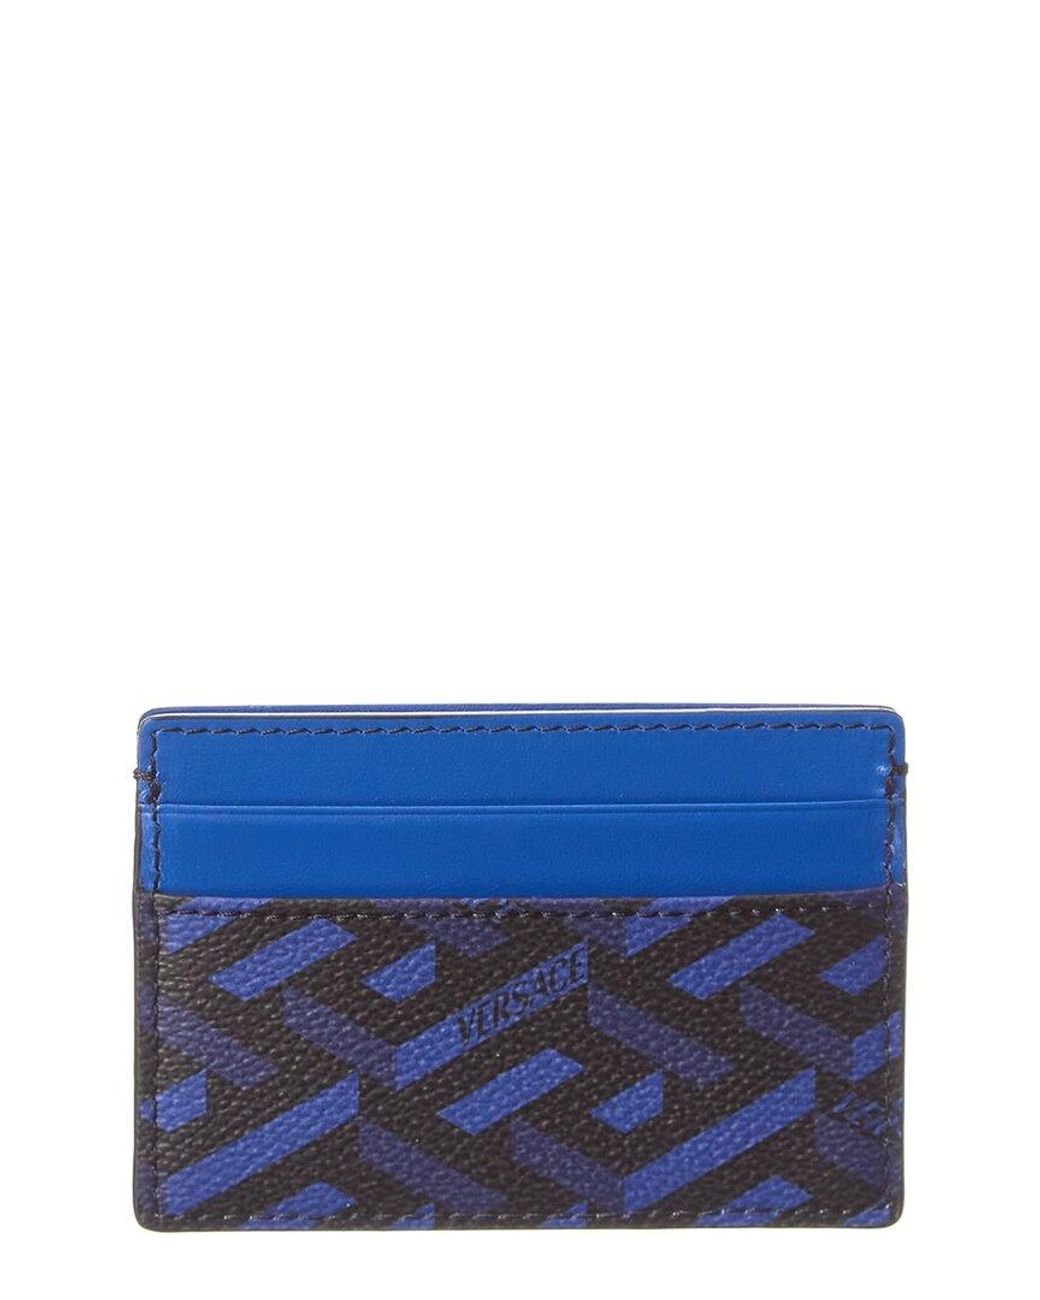 Versace La Greca Coated Canvas & Leather Card Holder in Blue | Lyst